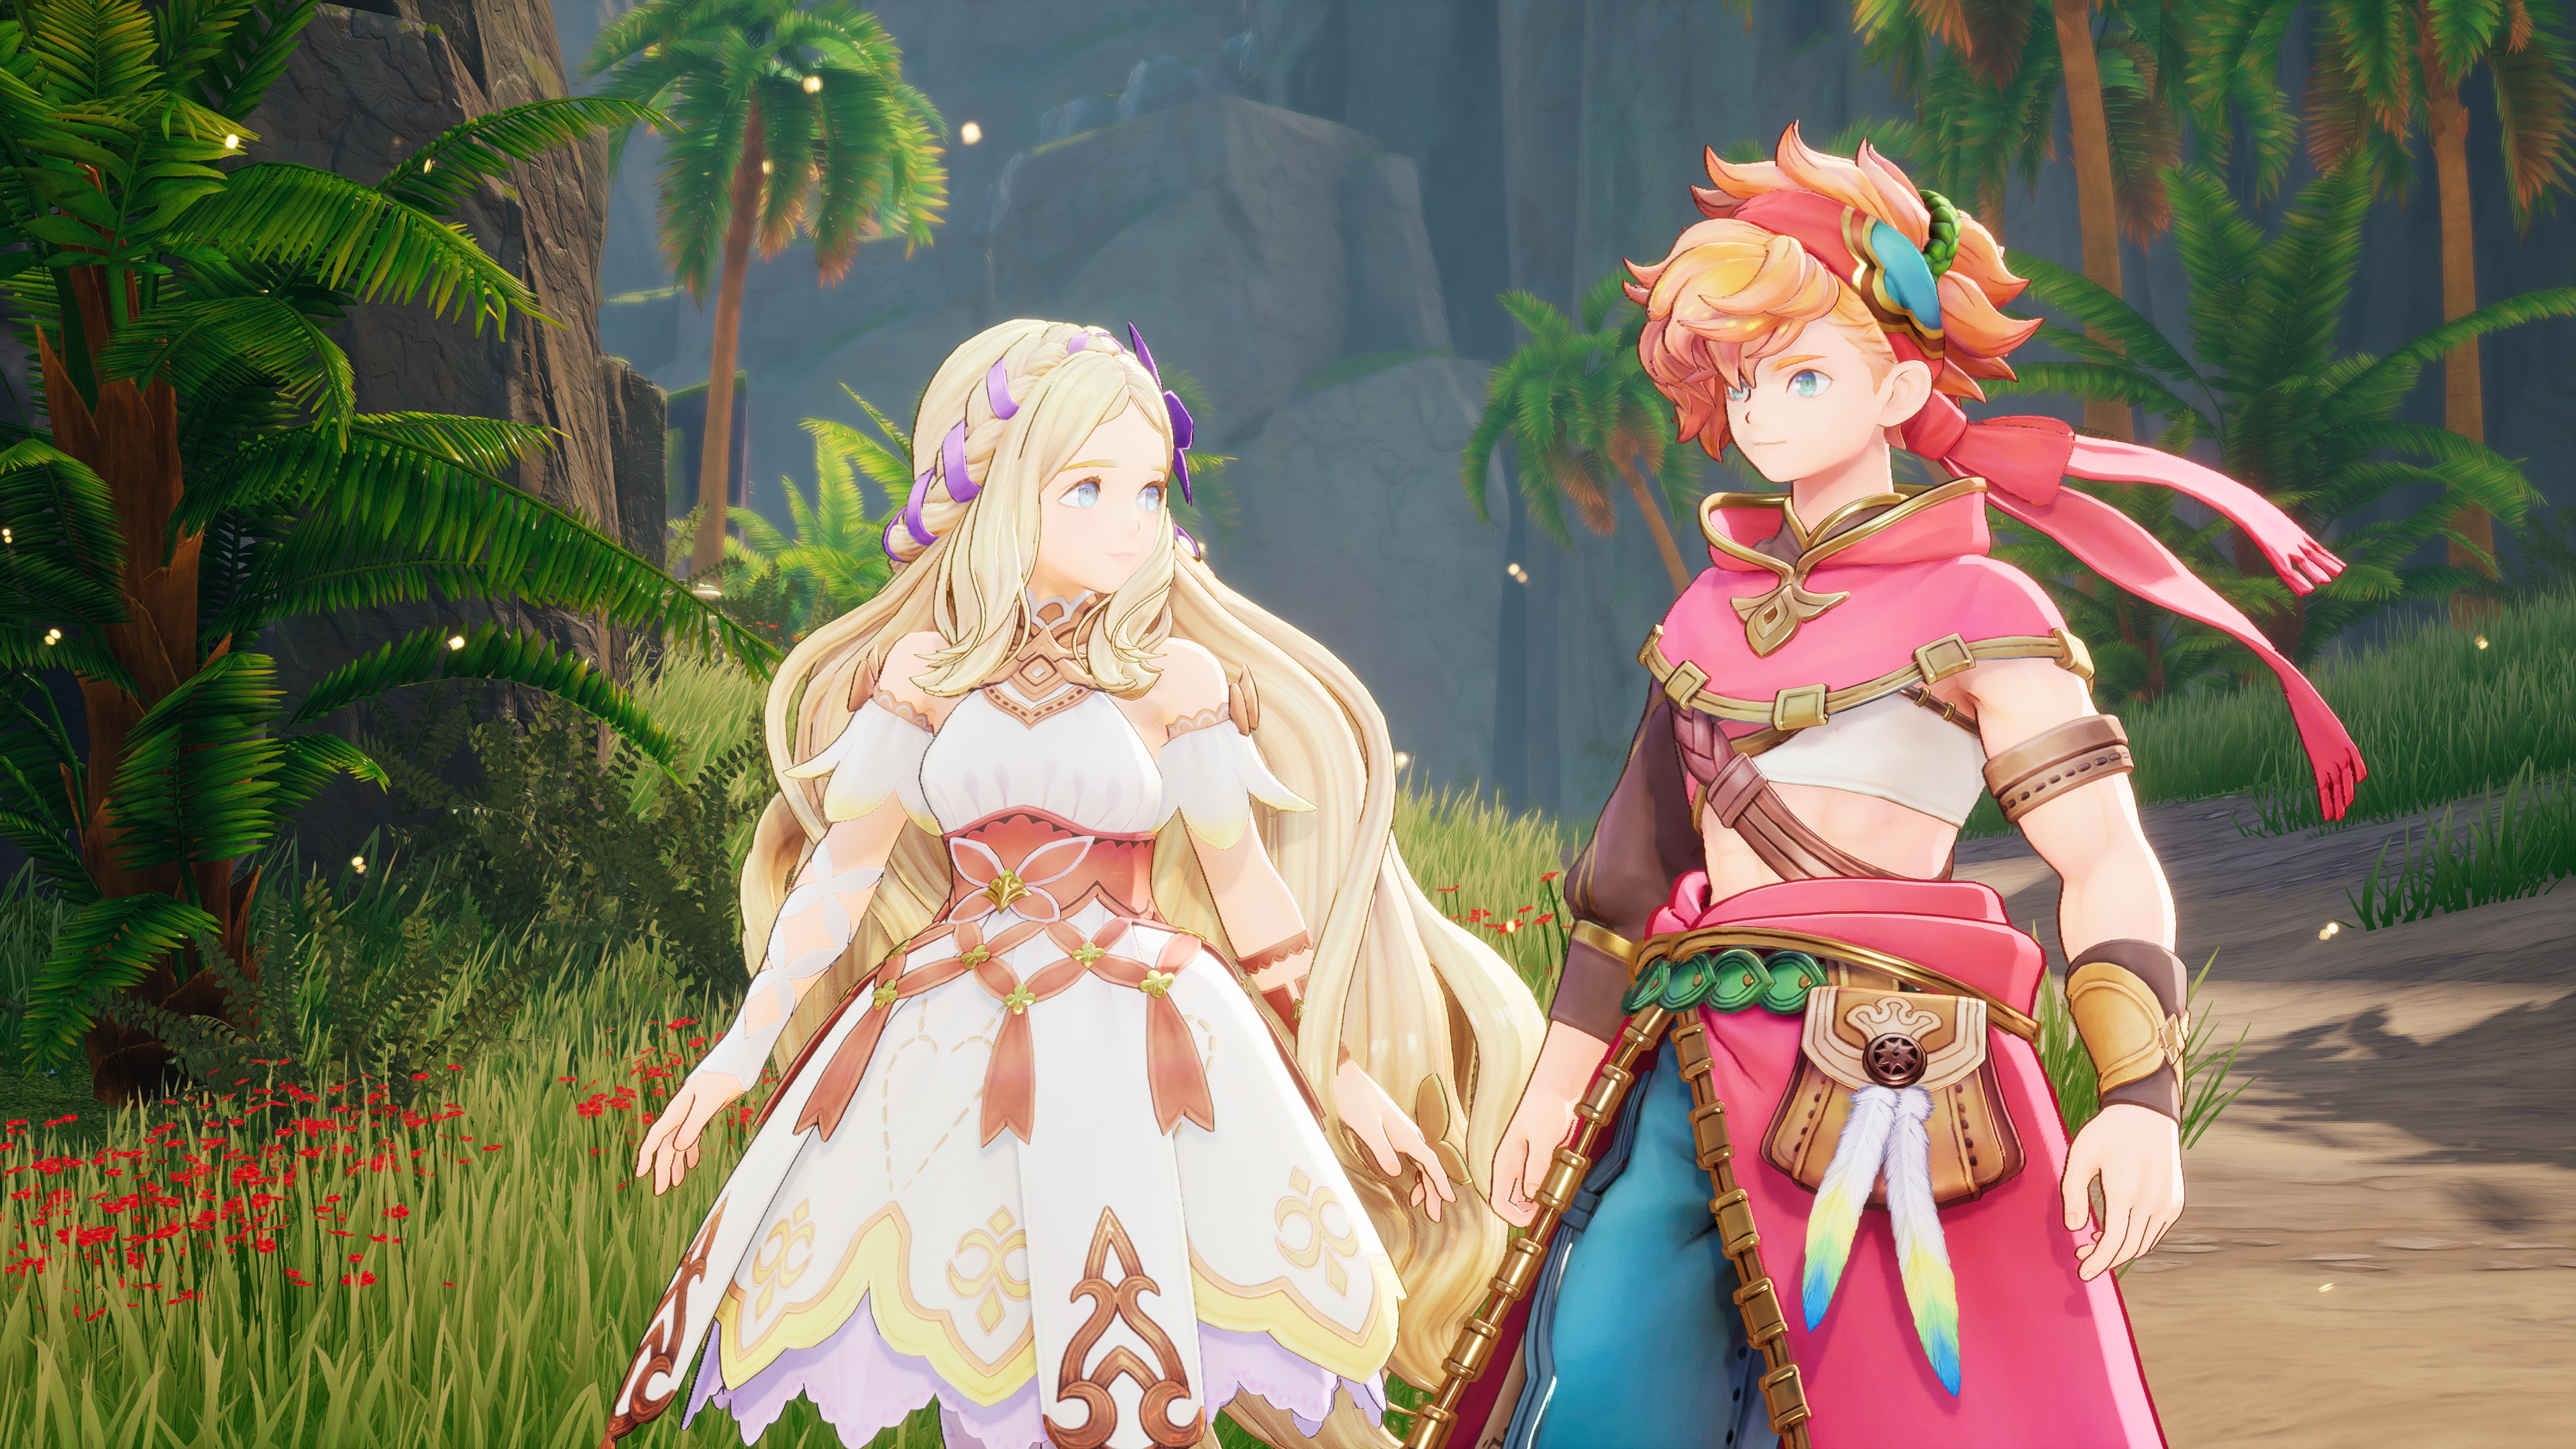 Visions of Mana release date estimate, trailers, and latest news